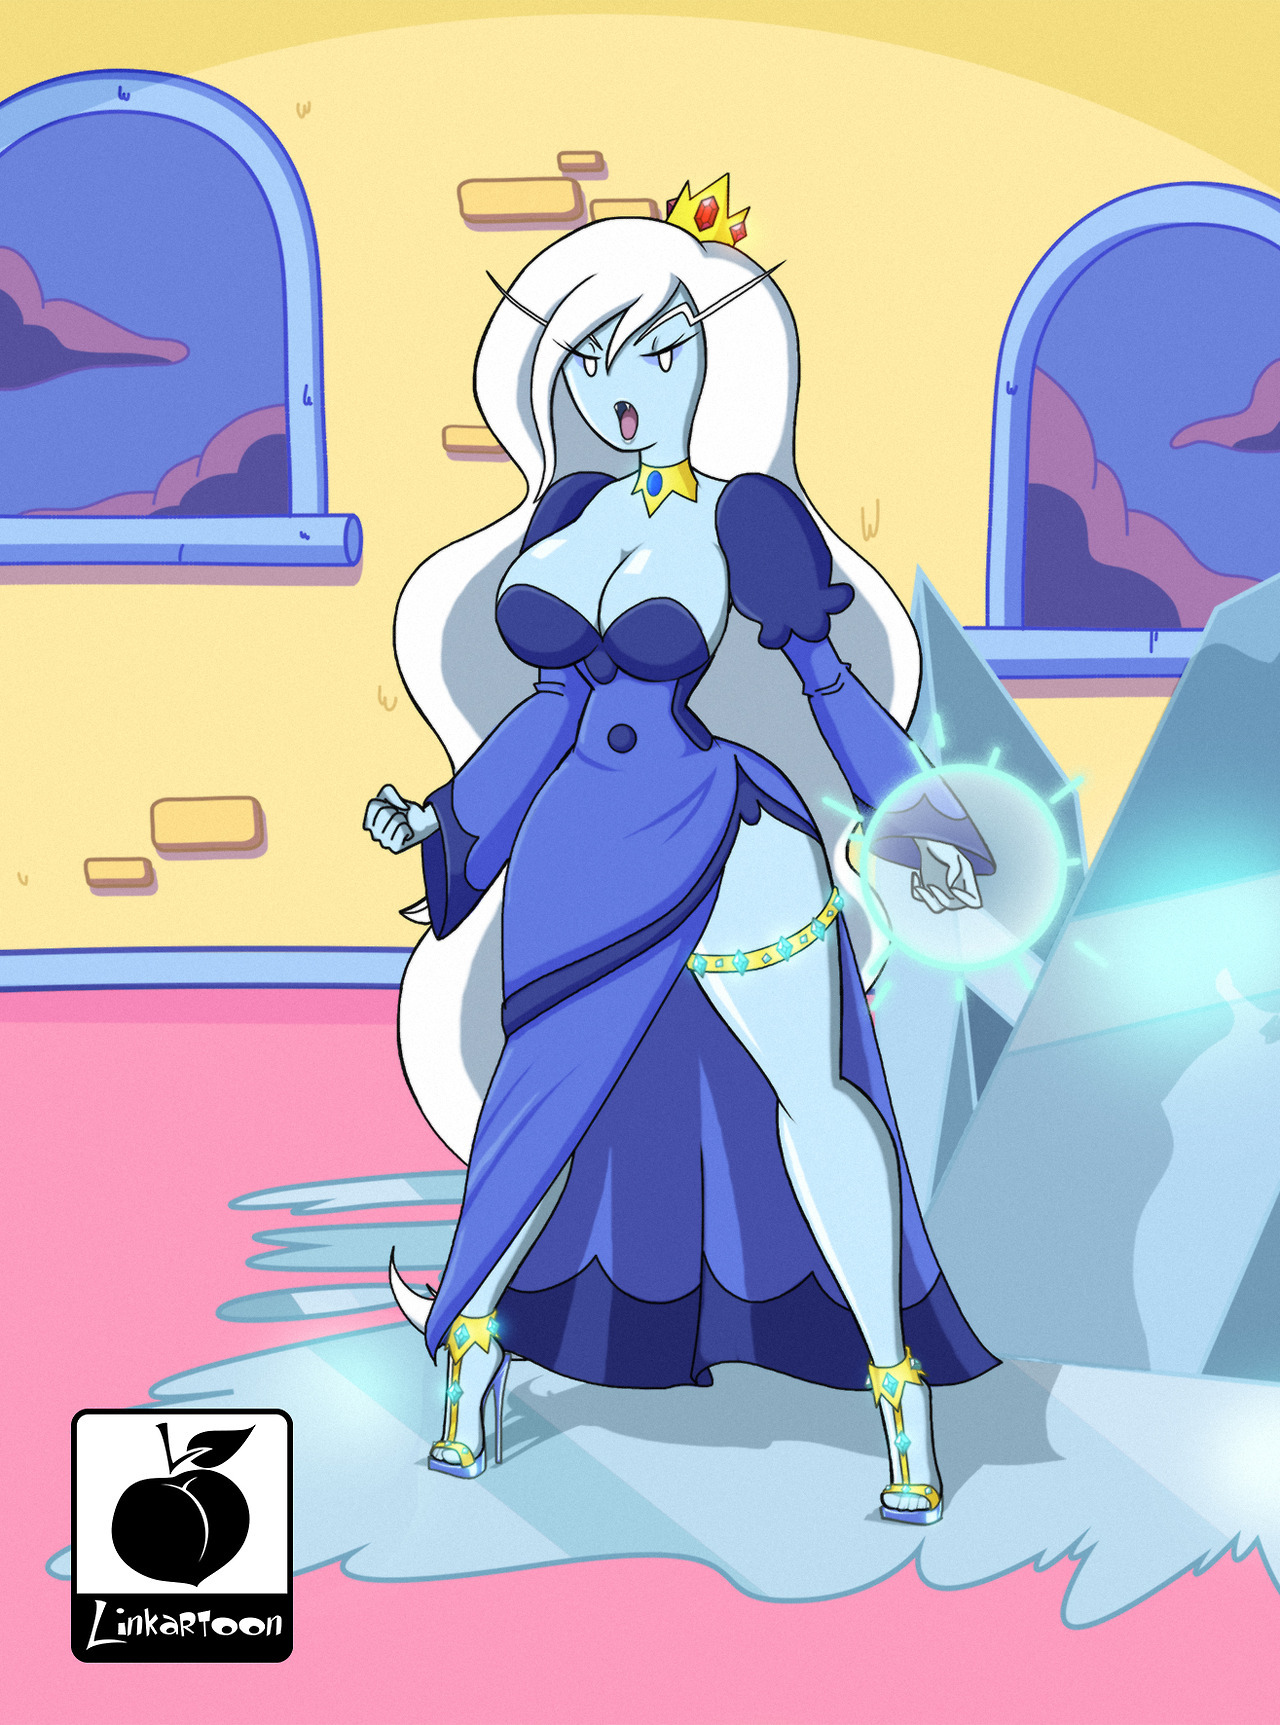 linkartoon:   This is a drawing of my version of the Ice Queen, I know some prefer